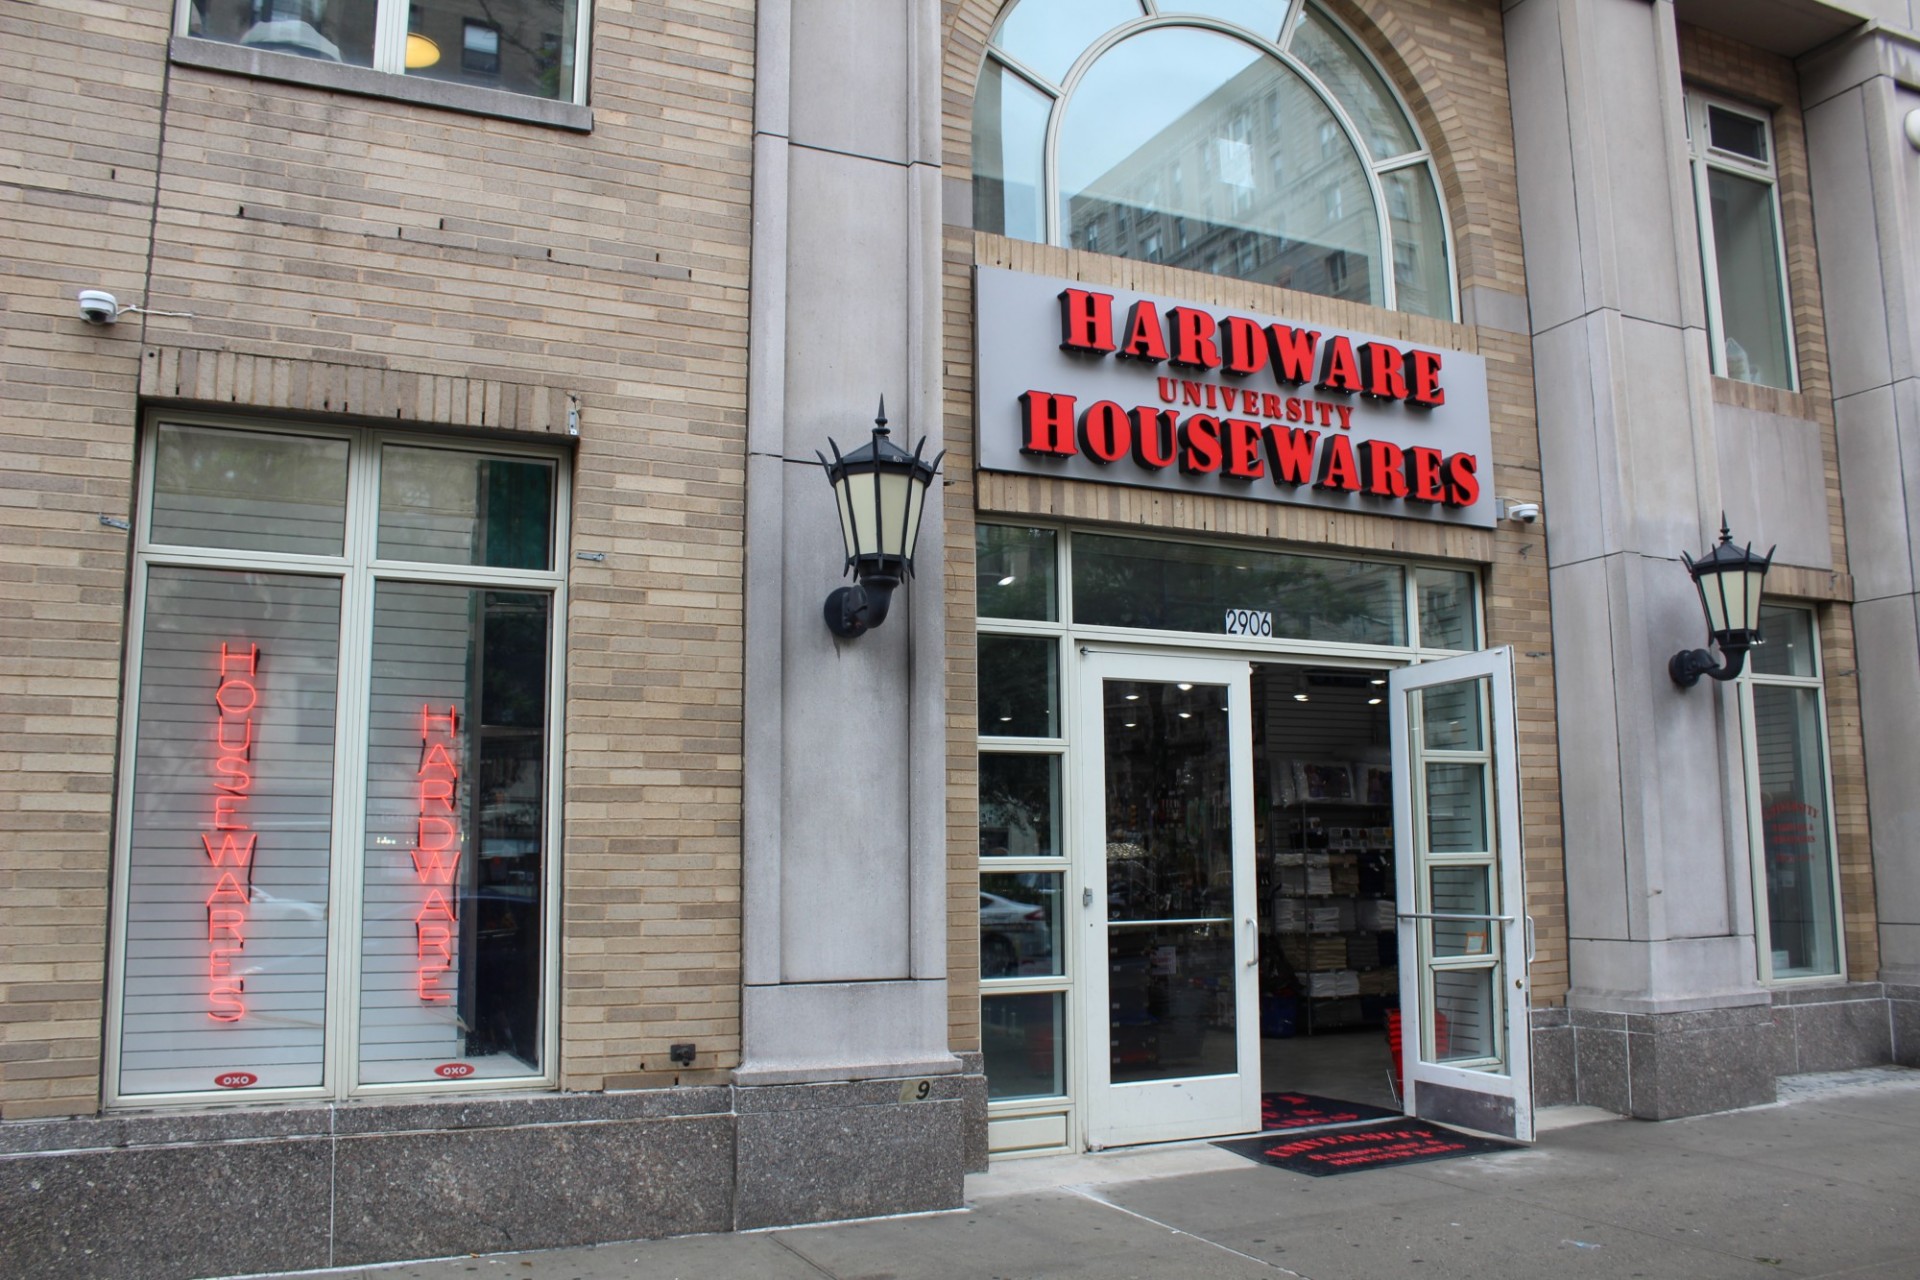 The new location of University Hardware and Housewares will be at 2906 Broadway, between 113th and 114th streets.